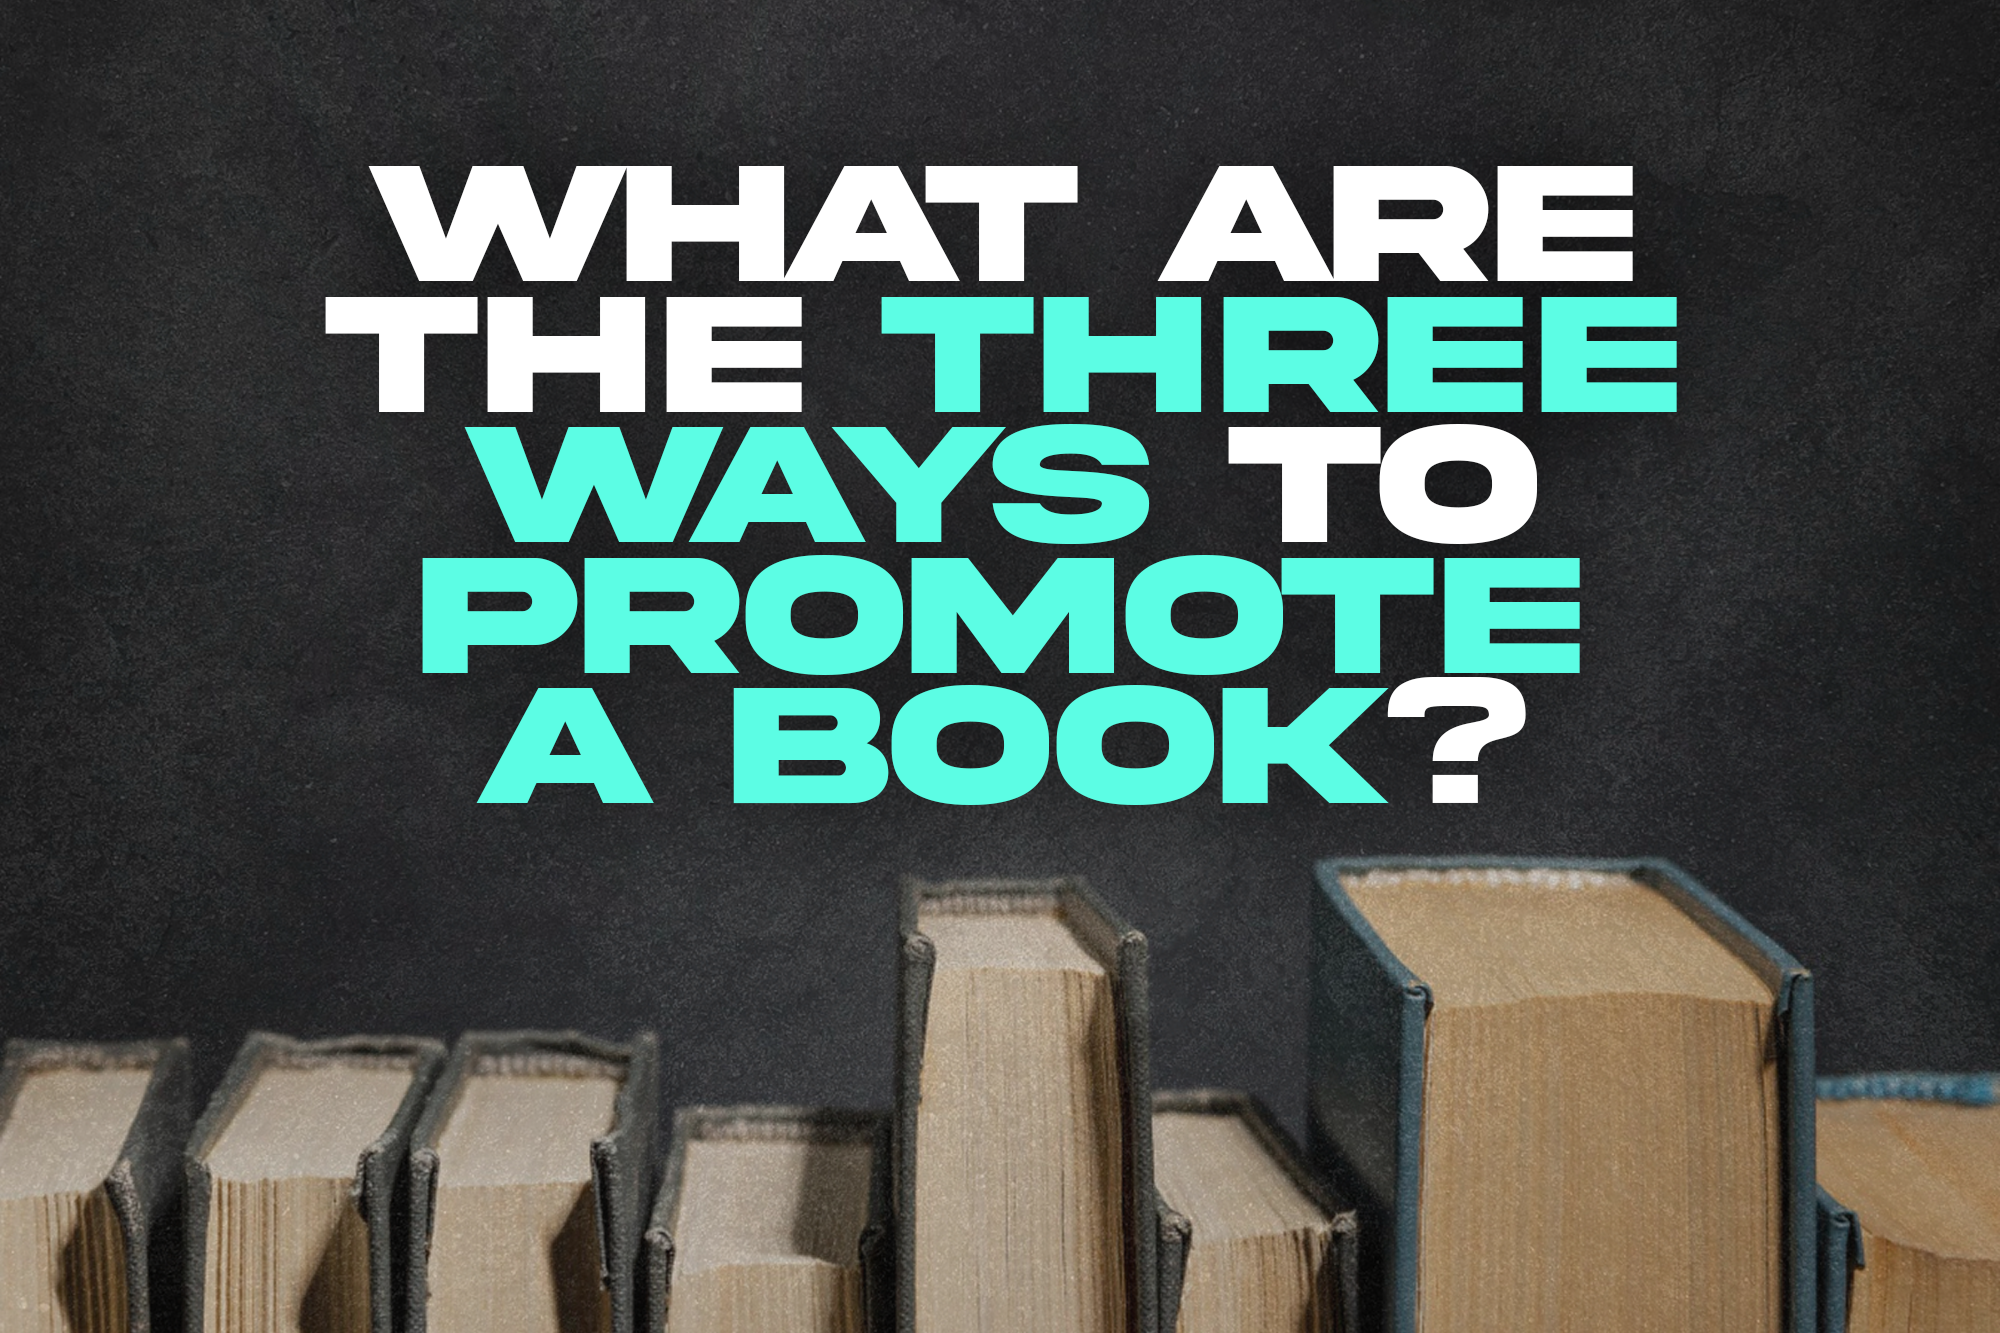 What are the three ways to promote a book